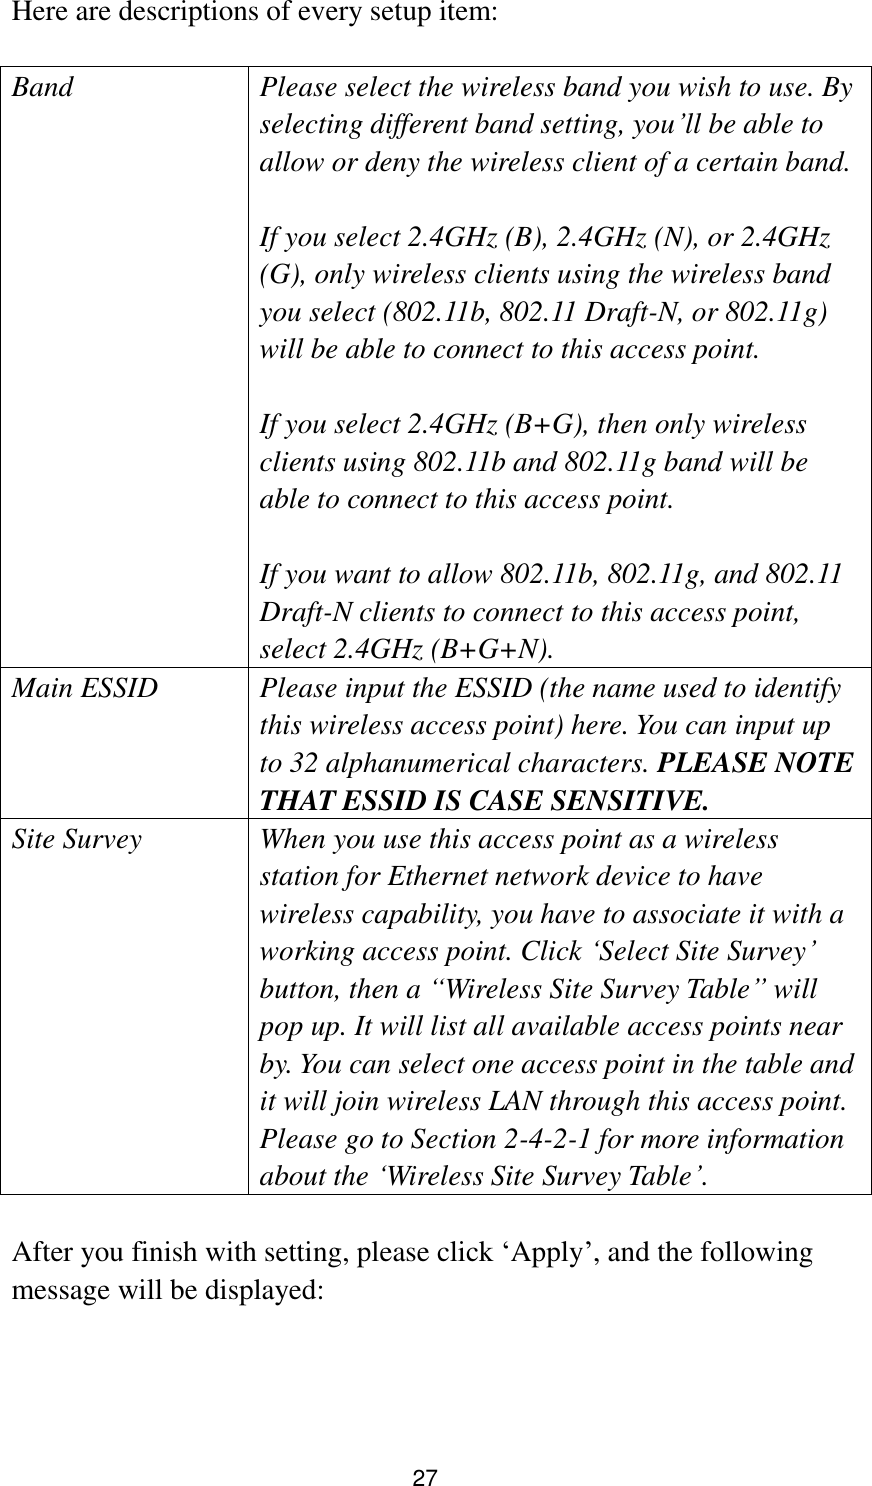 27 Here are descriptions of every setup item:  Band Please select the wireless band you wish to use. By selecting different band setting, you‟ll be able to allow or deny the wireless client of a certain band.    If you select 2.4GHz (B), 2.4GHz (N), or 2.4GHz (G), only wireless clients using the wireless band you select (802.11b, 802.11 Draft-N, or 802.11g) will be able to connect to this access point.  If you select 2.4GHz (B+G), then only wireless clients using 802.11b and 802.11g band will be able to connect to this access point.    If you want to allow 802.11b, 802.11g, and 802.11 Draft-N clients to connect to this access point, select 2.4GHz (B+G+N). Main ESSID Please input the ESSID (the name used to identify this wireless access point) here. You can input up to 32 alphanumerical characters. PLEASE NOTE     THAT ESSID IS CASE SENSITIVE. Site Survey When you use this access point as a wireless station for Ethernet network device to have wireless capability, you have to associate it with a working access point. Click „Select Site Survey‟ button, then a “Wireless Site Survey Table” will pop up. It will list all available access points near by. You can select one access point in the table and it will join wireless LAN through this access point. Please go to Section 2-4-2-1 for more information about the „Wireless Site Survey Table‟.  After you finish with setting, please click „Apply‟, and the following message will be displayed:  